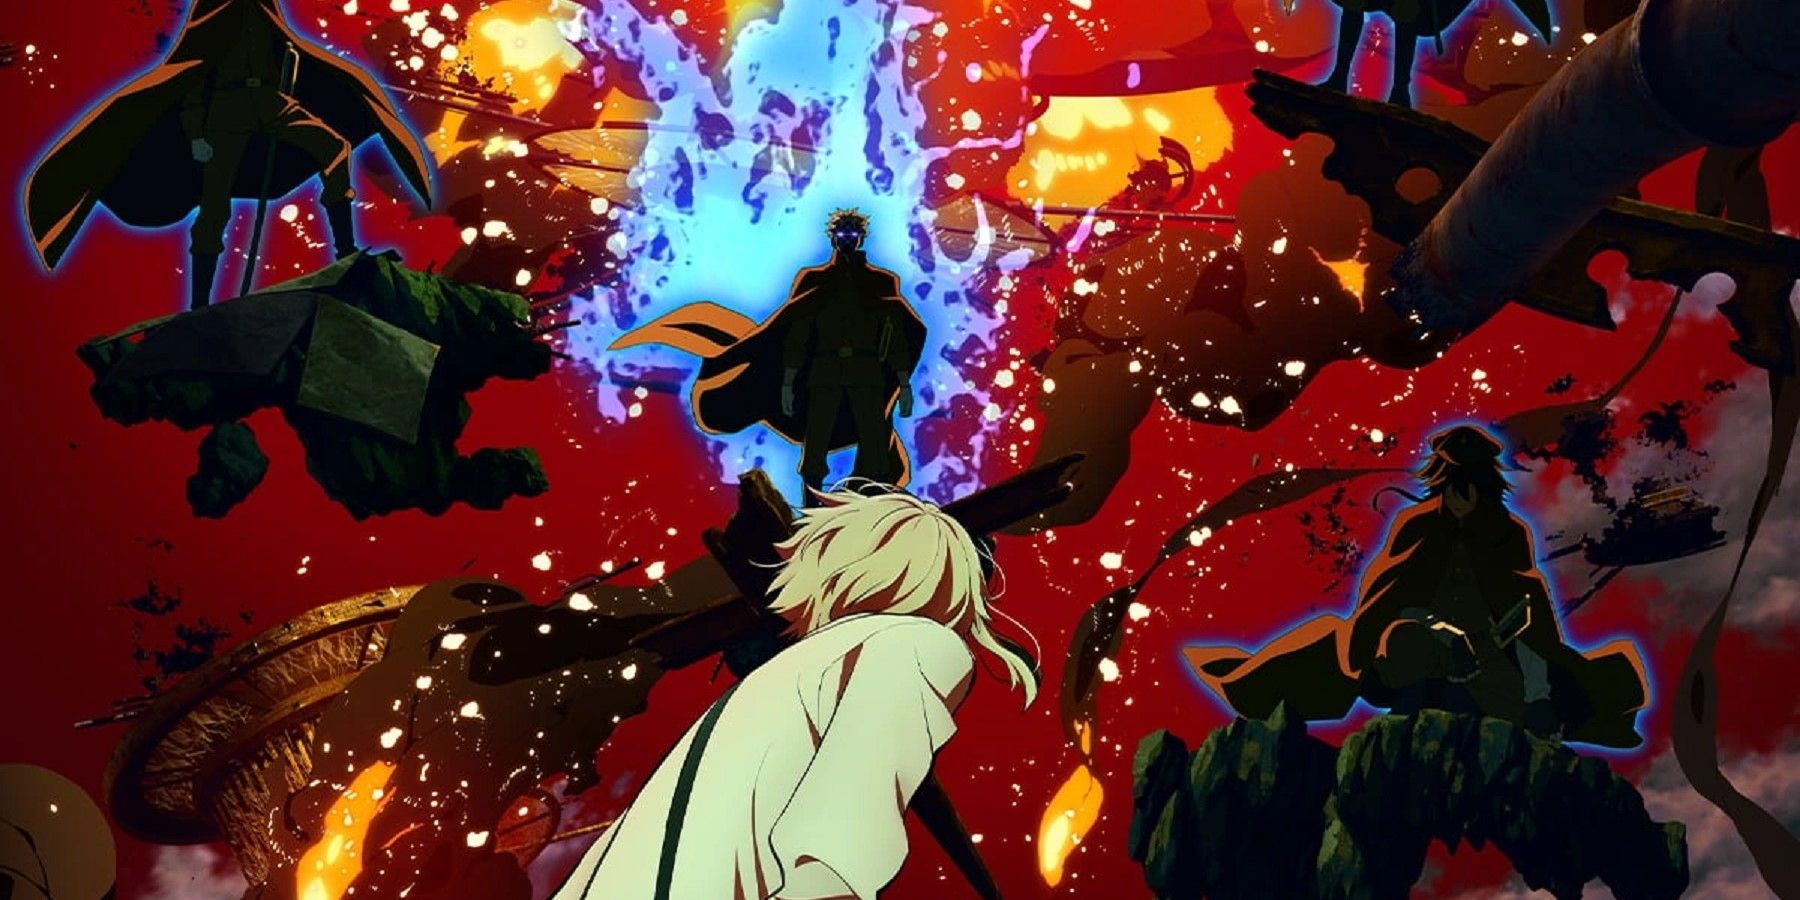 Bungō Stray Dogs Season 4 Episode 3 Release Date and Episode 2 Ending Explained